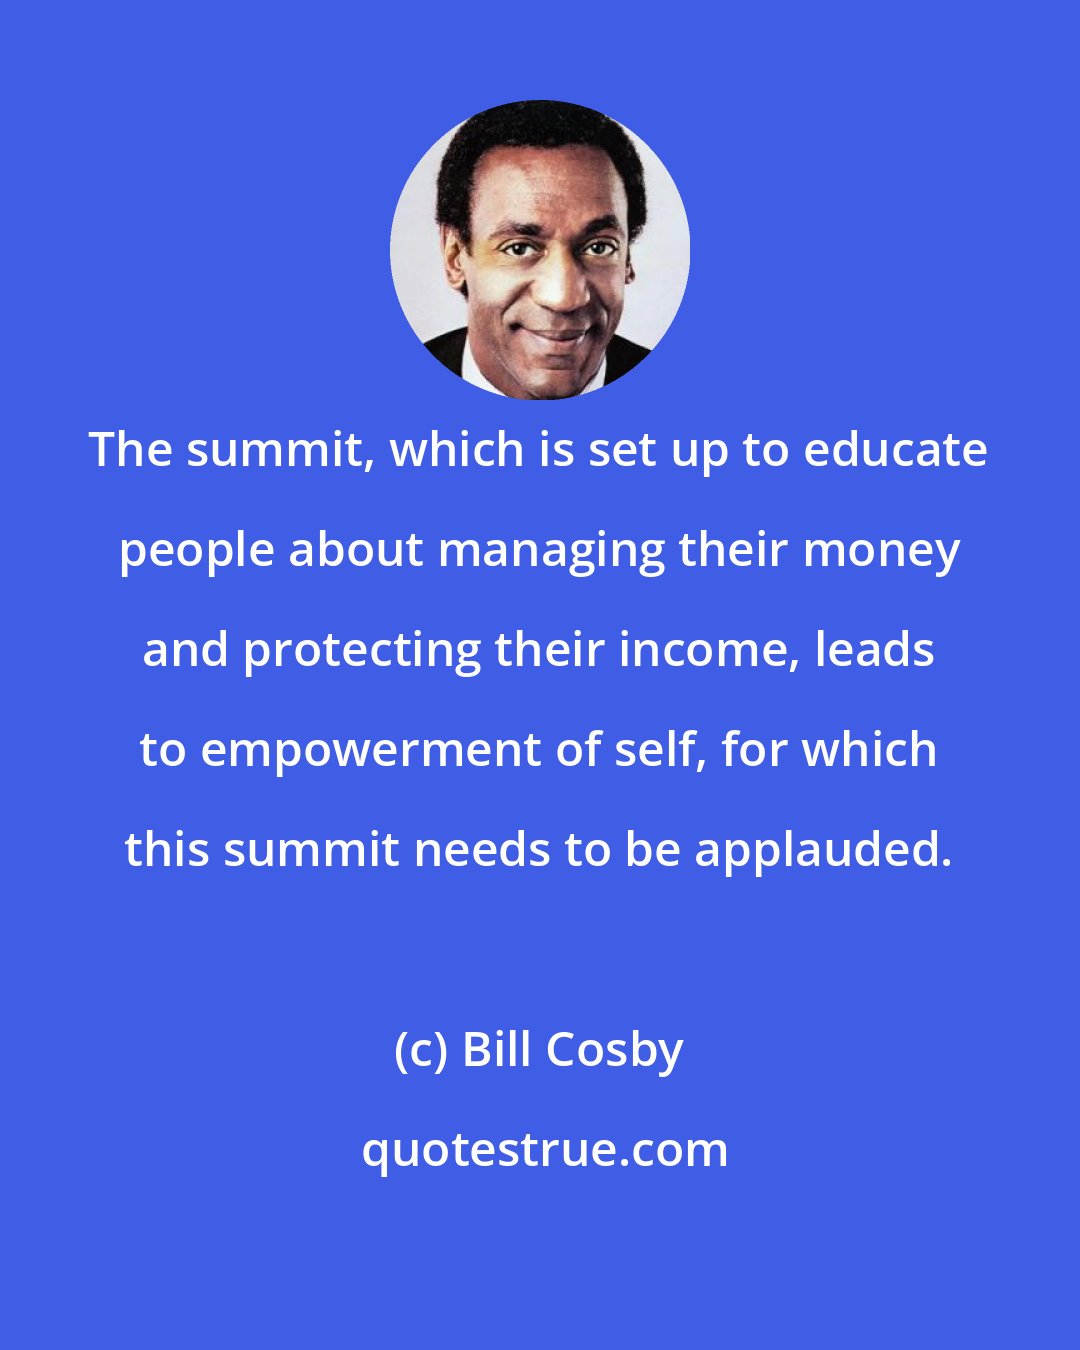 Bill Cosby: The summit, which is set up to educate people about managing their money and protecting their income, leads to empowerment of self, for which this summit needs to be applauded.